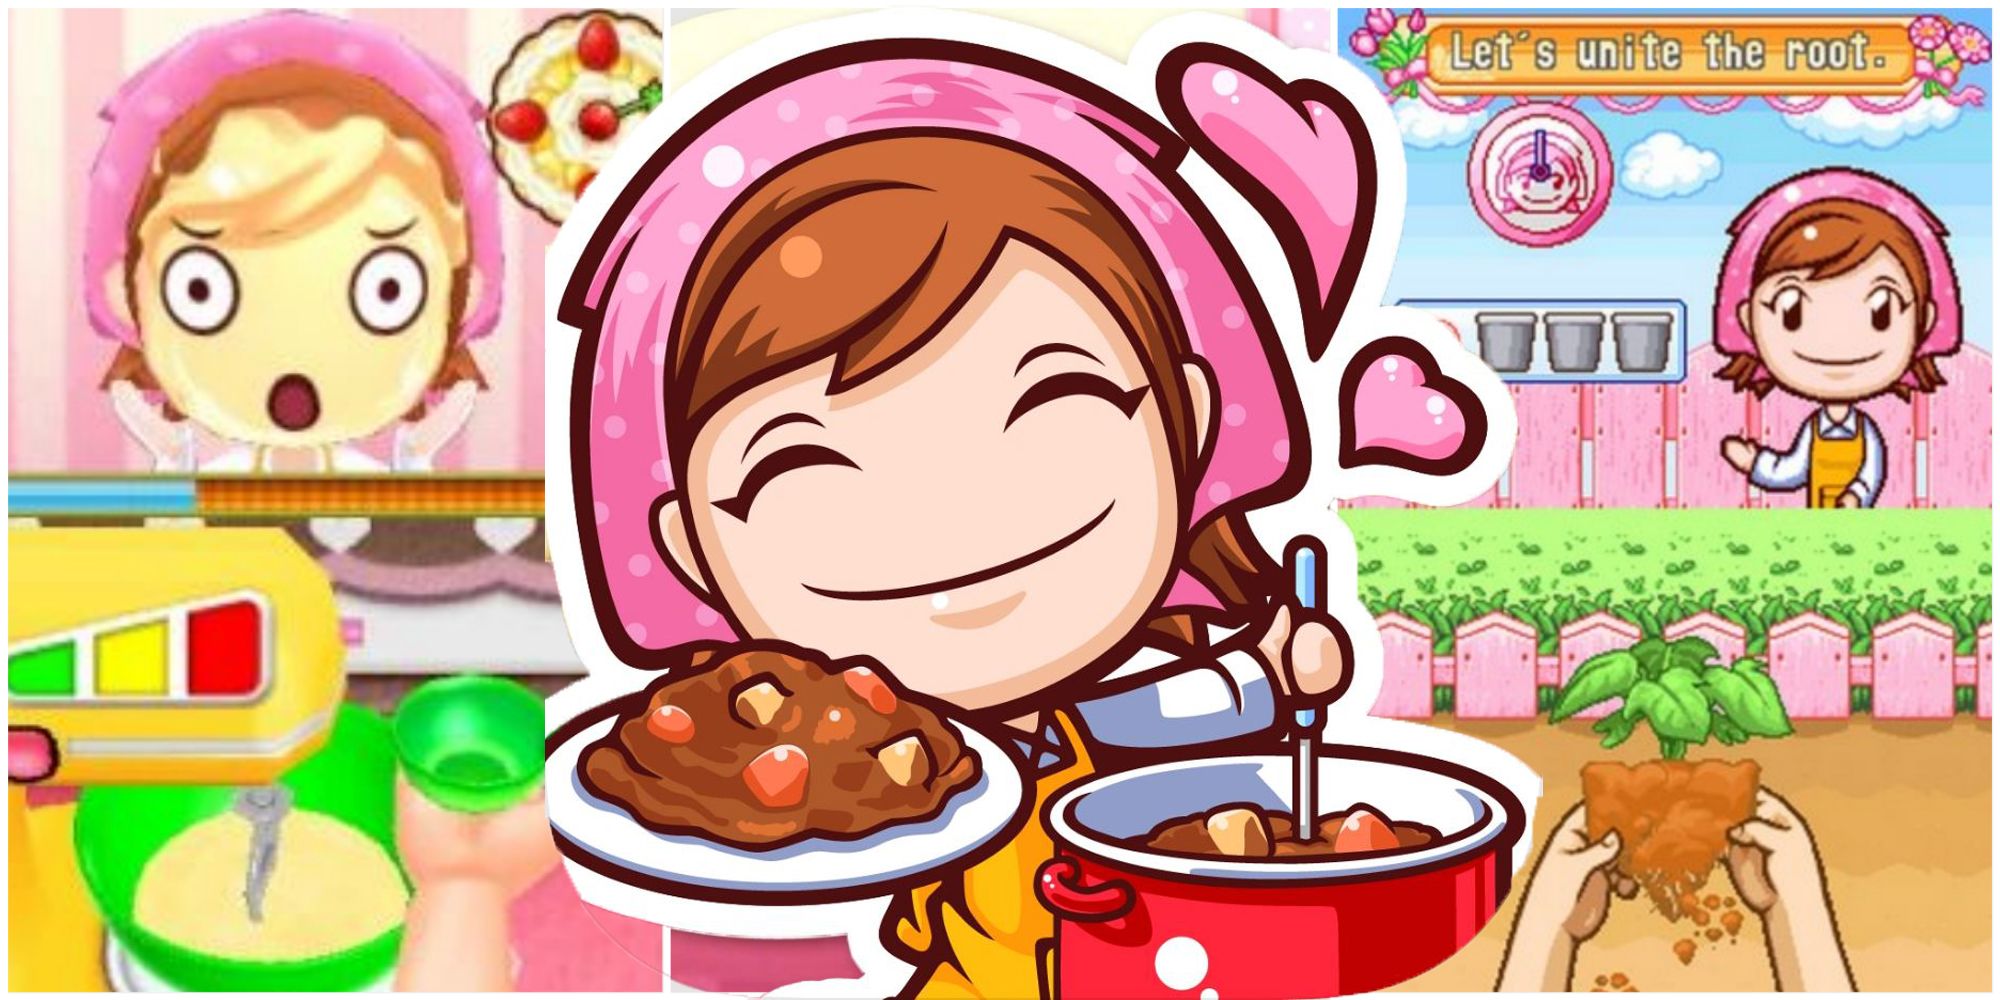 Split image of Cooking Mama with batter covering her face, Cooking Mama holding plate of chili, and Cooking Mama instructing player to plant garden